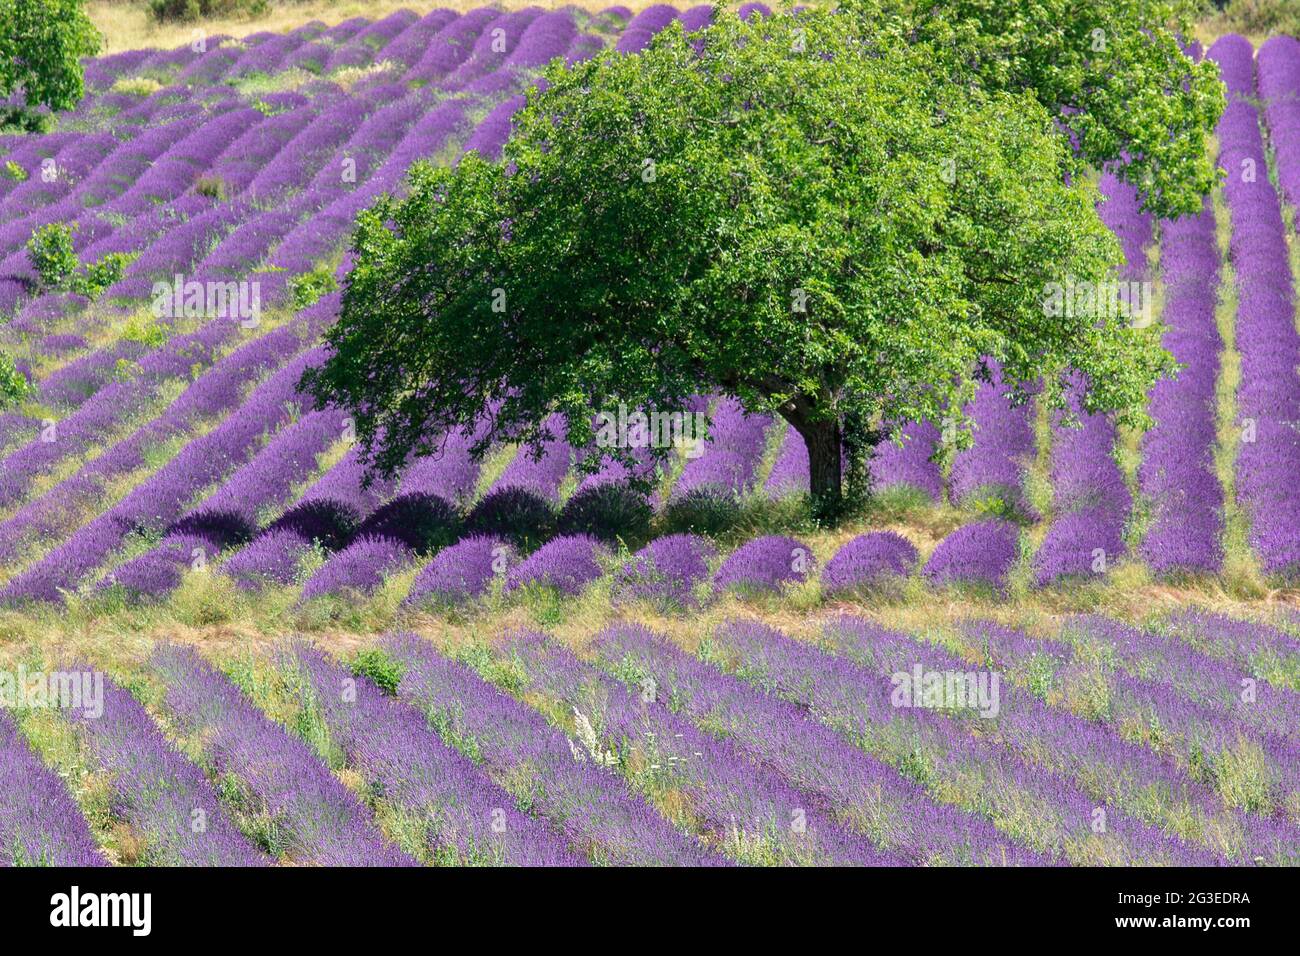 FRANCE. DROME (26) LE-BARRET-DE-LIOURE (REGIONAL NATURAL PARK OF BARONNIES OF PROVENCE) LANDSCAPE PAYSAGE TO DROWN (TREE)NG IN A FIELD OF LAVENDERS Stock Photo